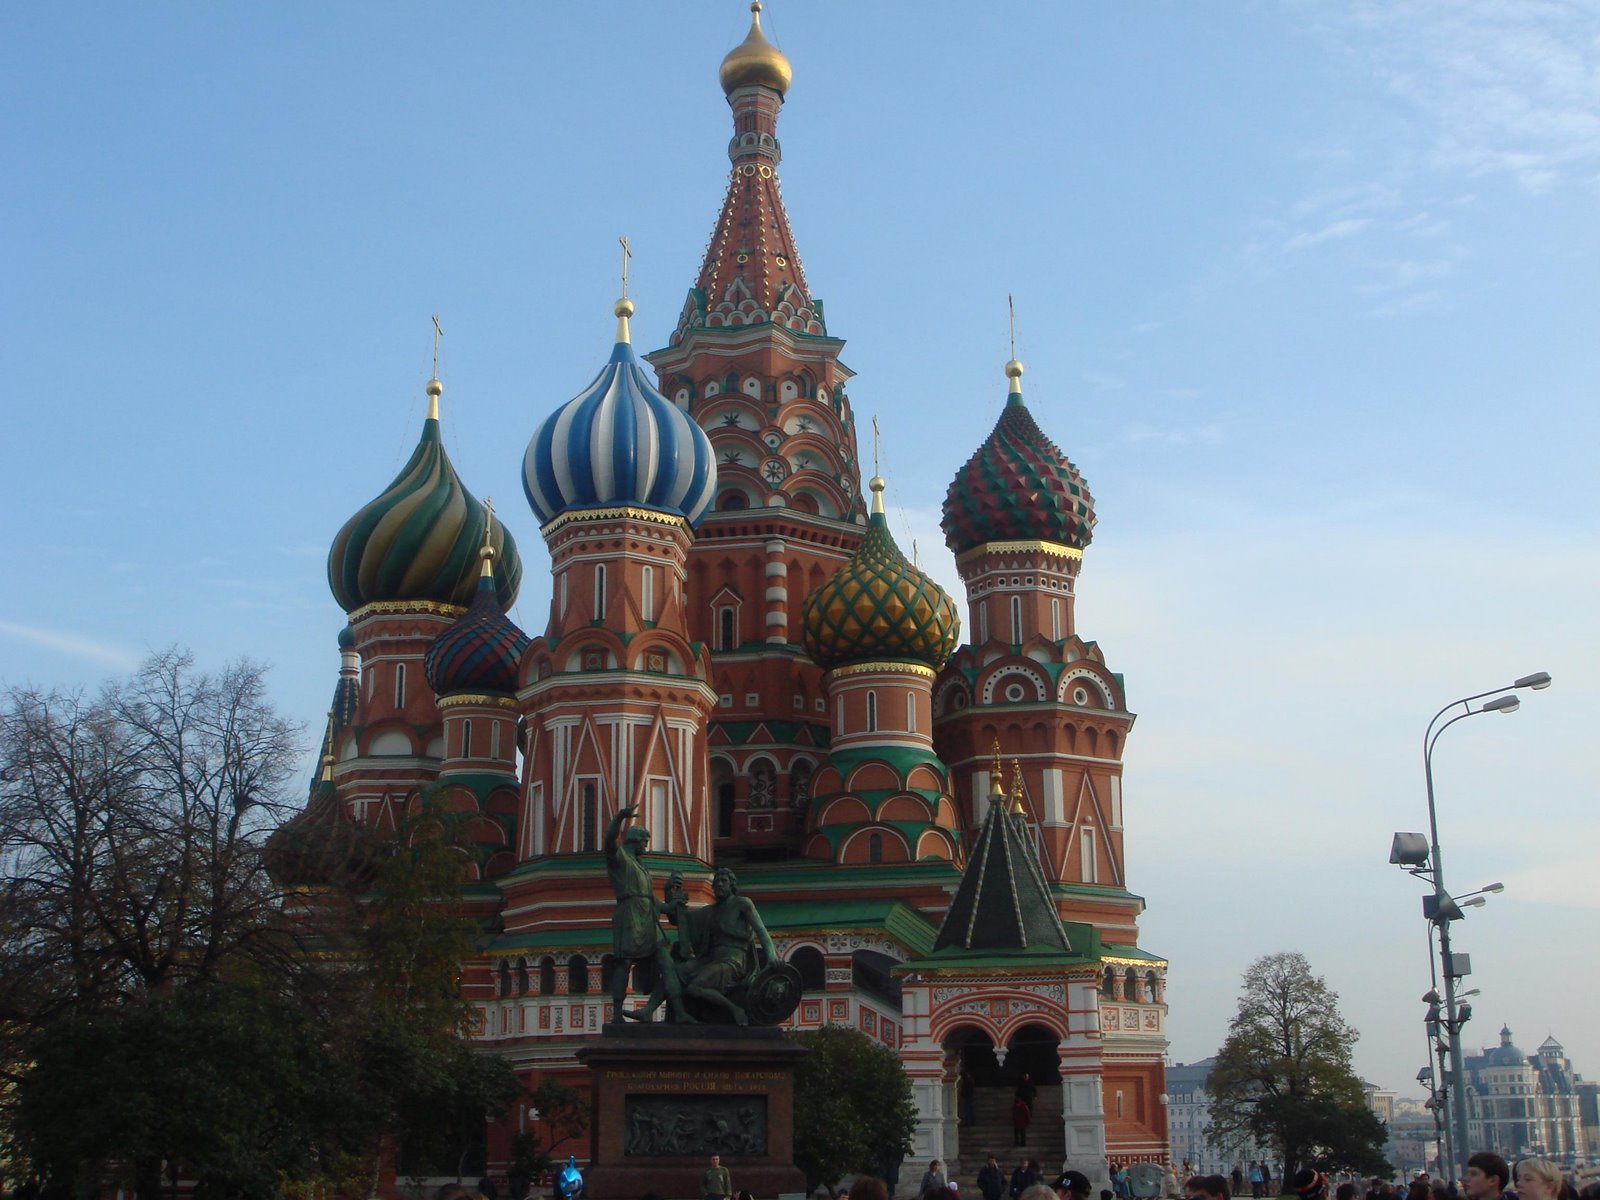 [st.basil's+cathedral.JPG]